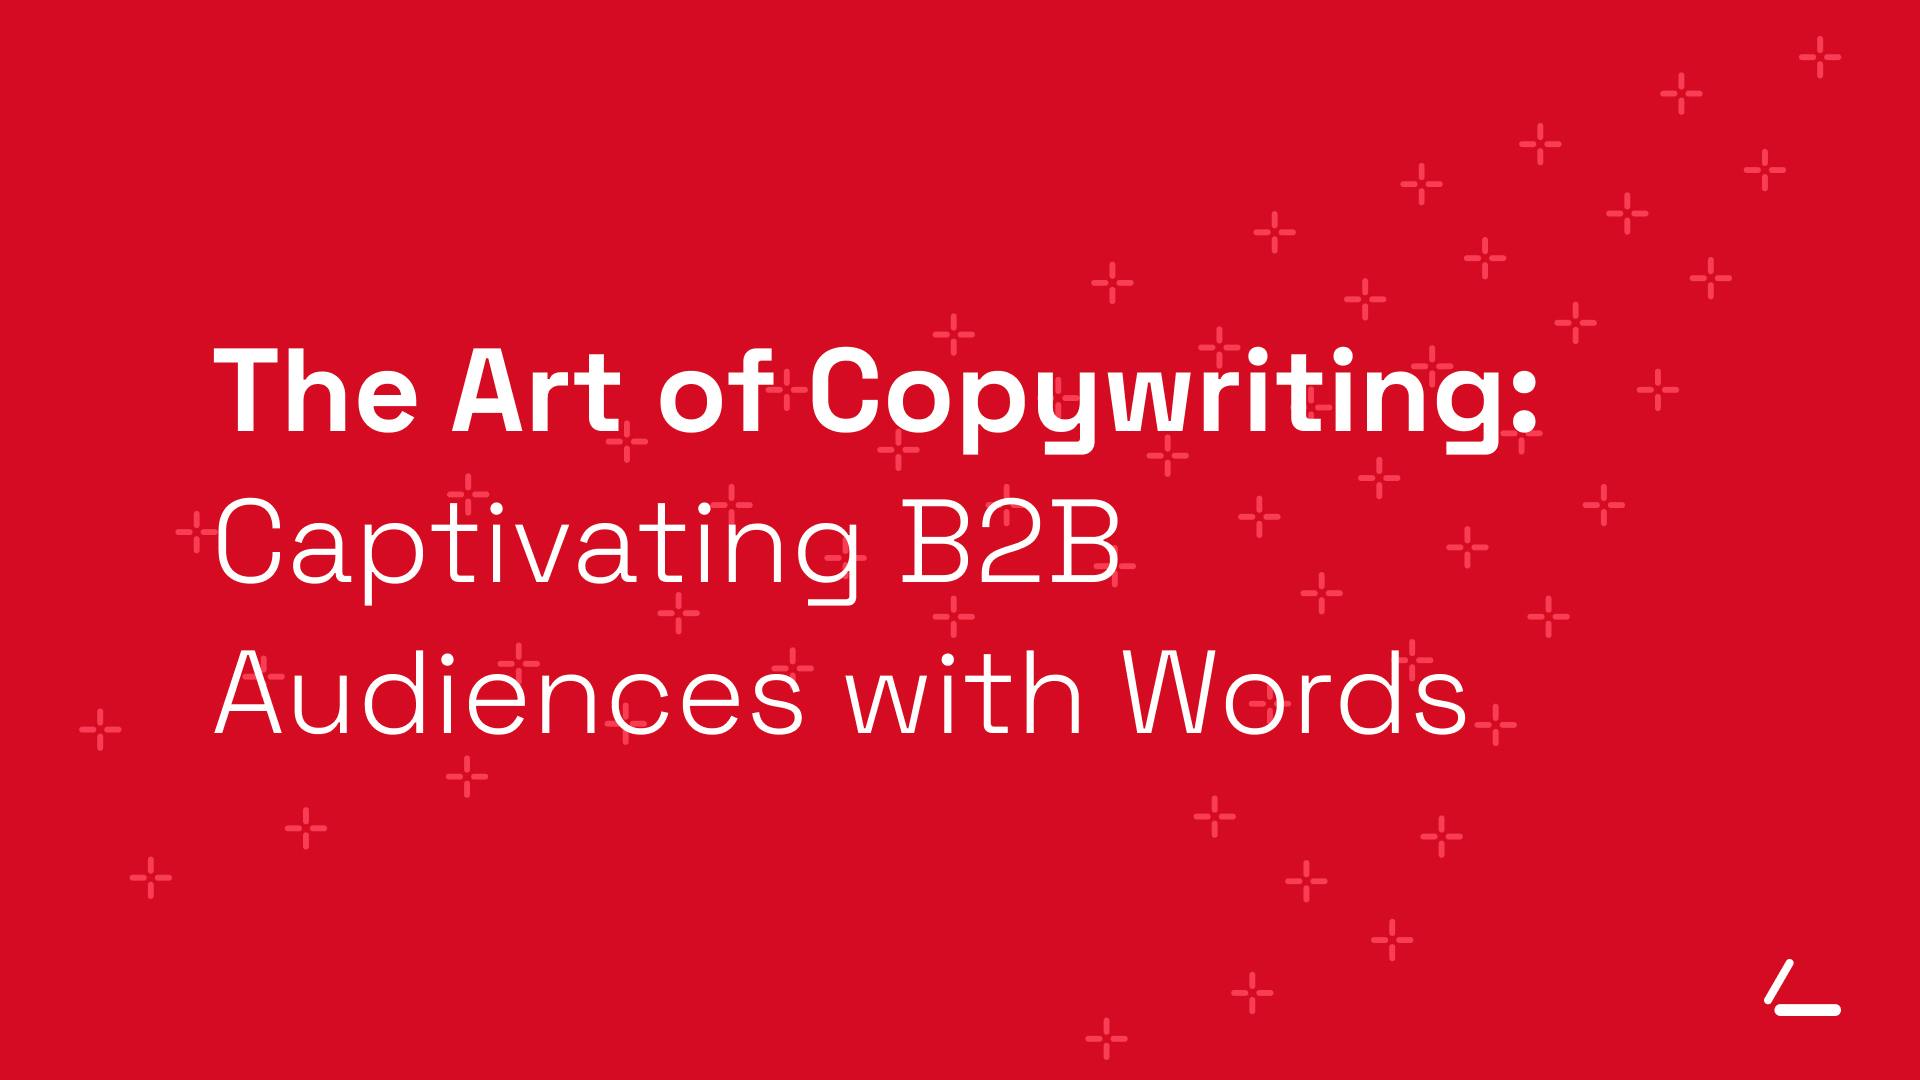 SEO Article Header - Red background with text about Copywriting